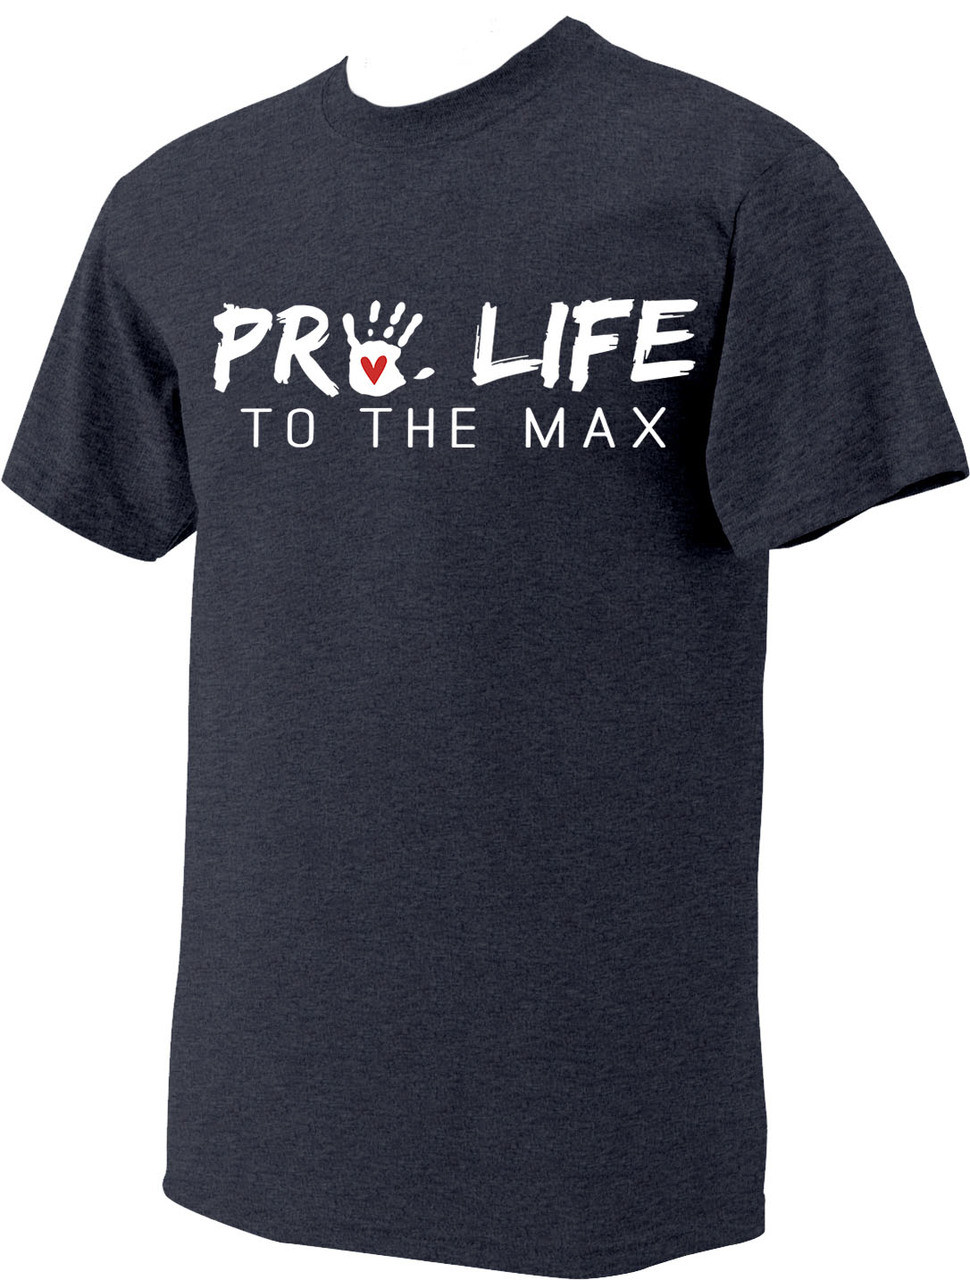 Pro-Life to the Max with Handprint T-Shirt